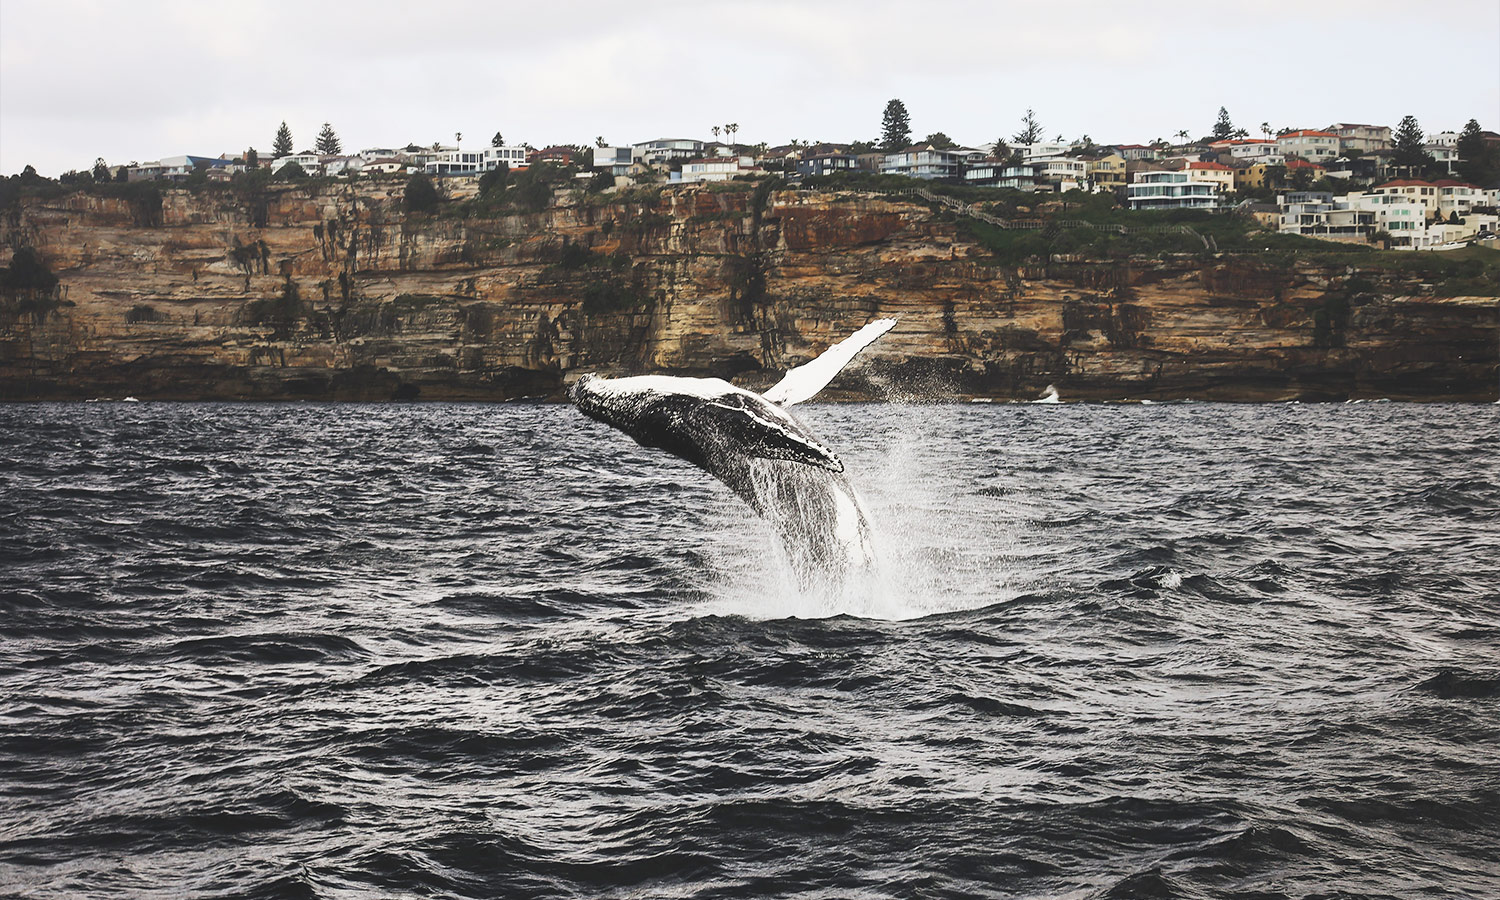 An image of a humpback whale in sydney to illustrate whale season sydney and where the best spots for whale watching are.